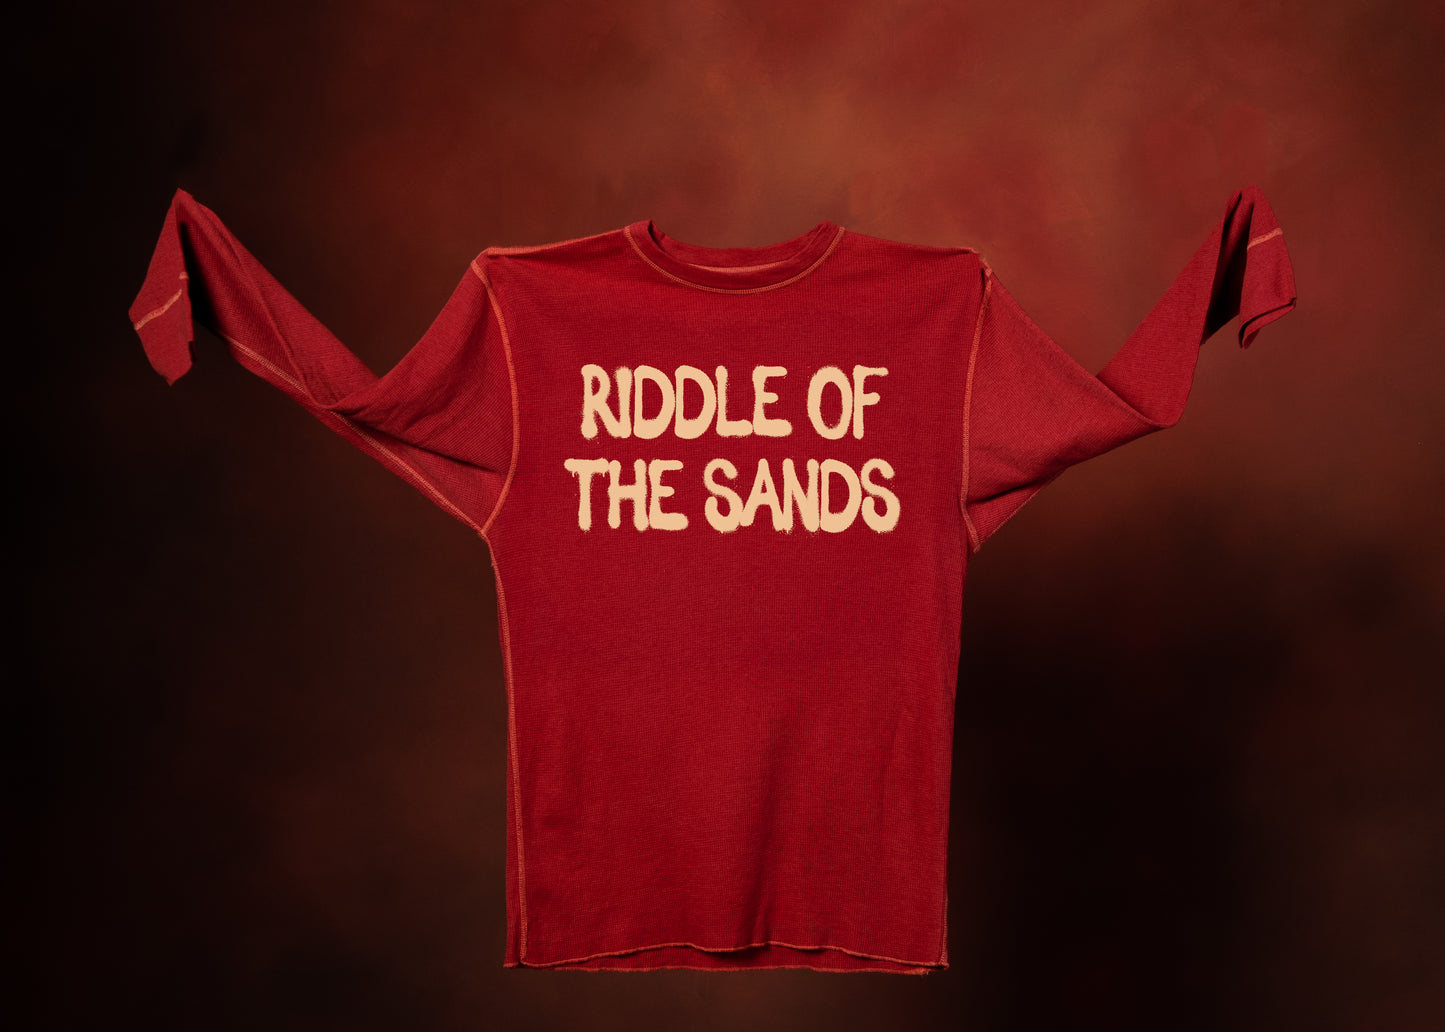 RIDDLE OF THE SANDS